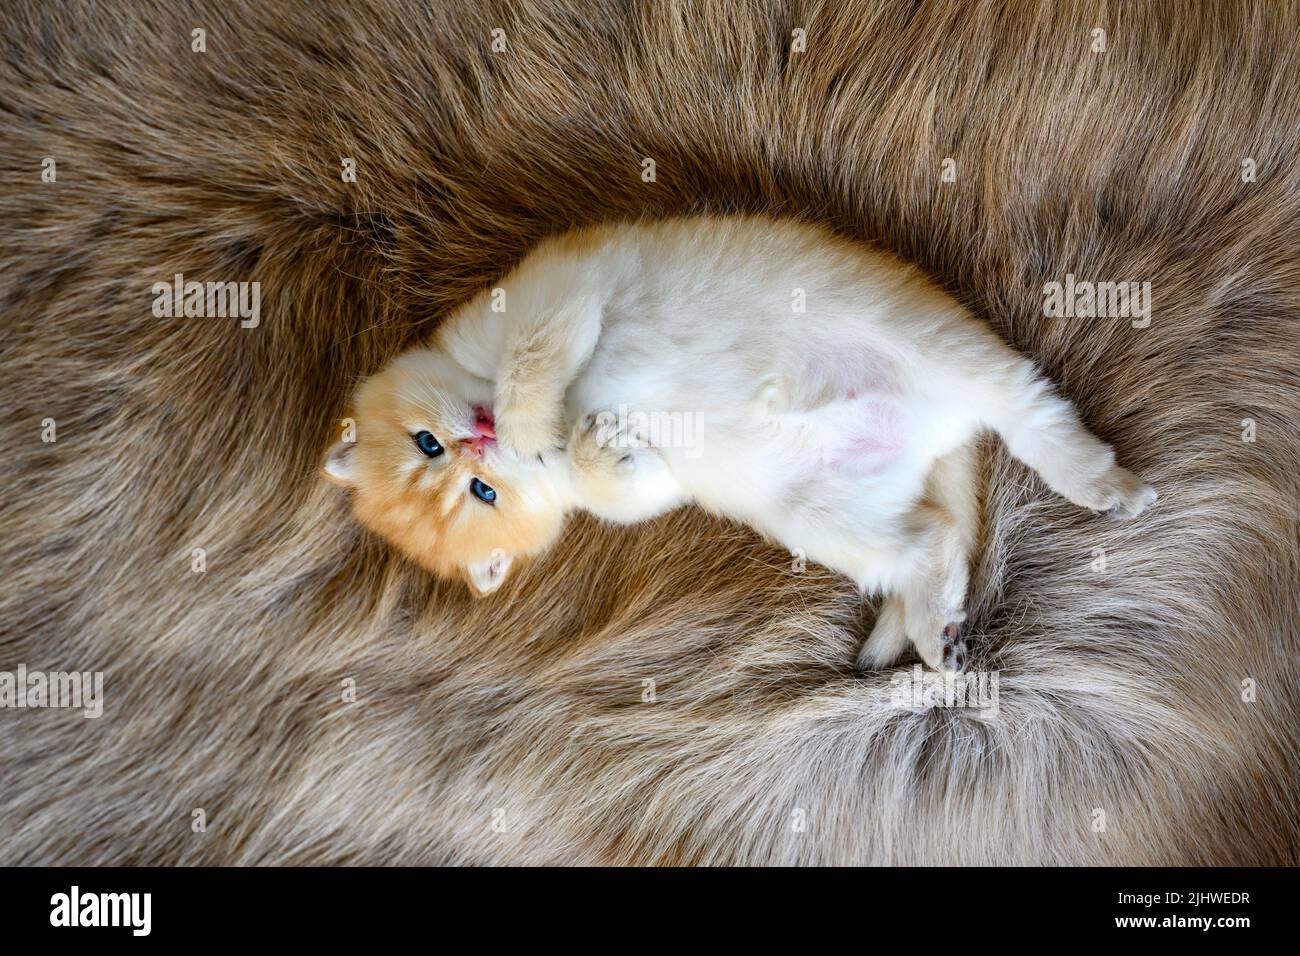 A kitten lies supine on a brown woolen carpet. The innocent kitten is licking its fur and biting its feet. British short hair cute, lying posing with Stock Photo